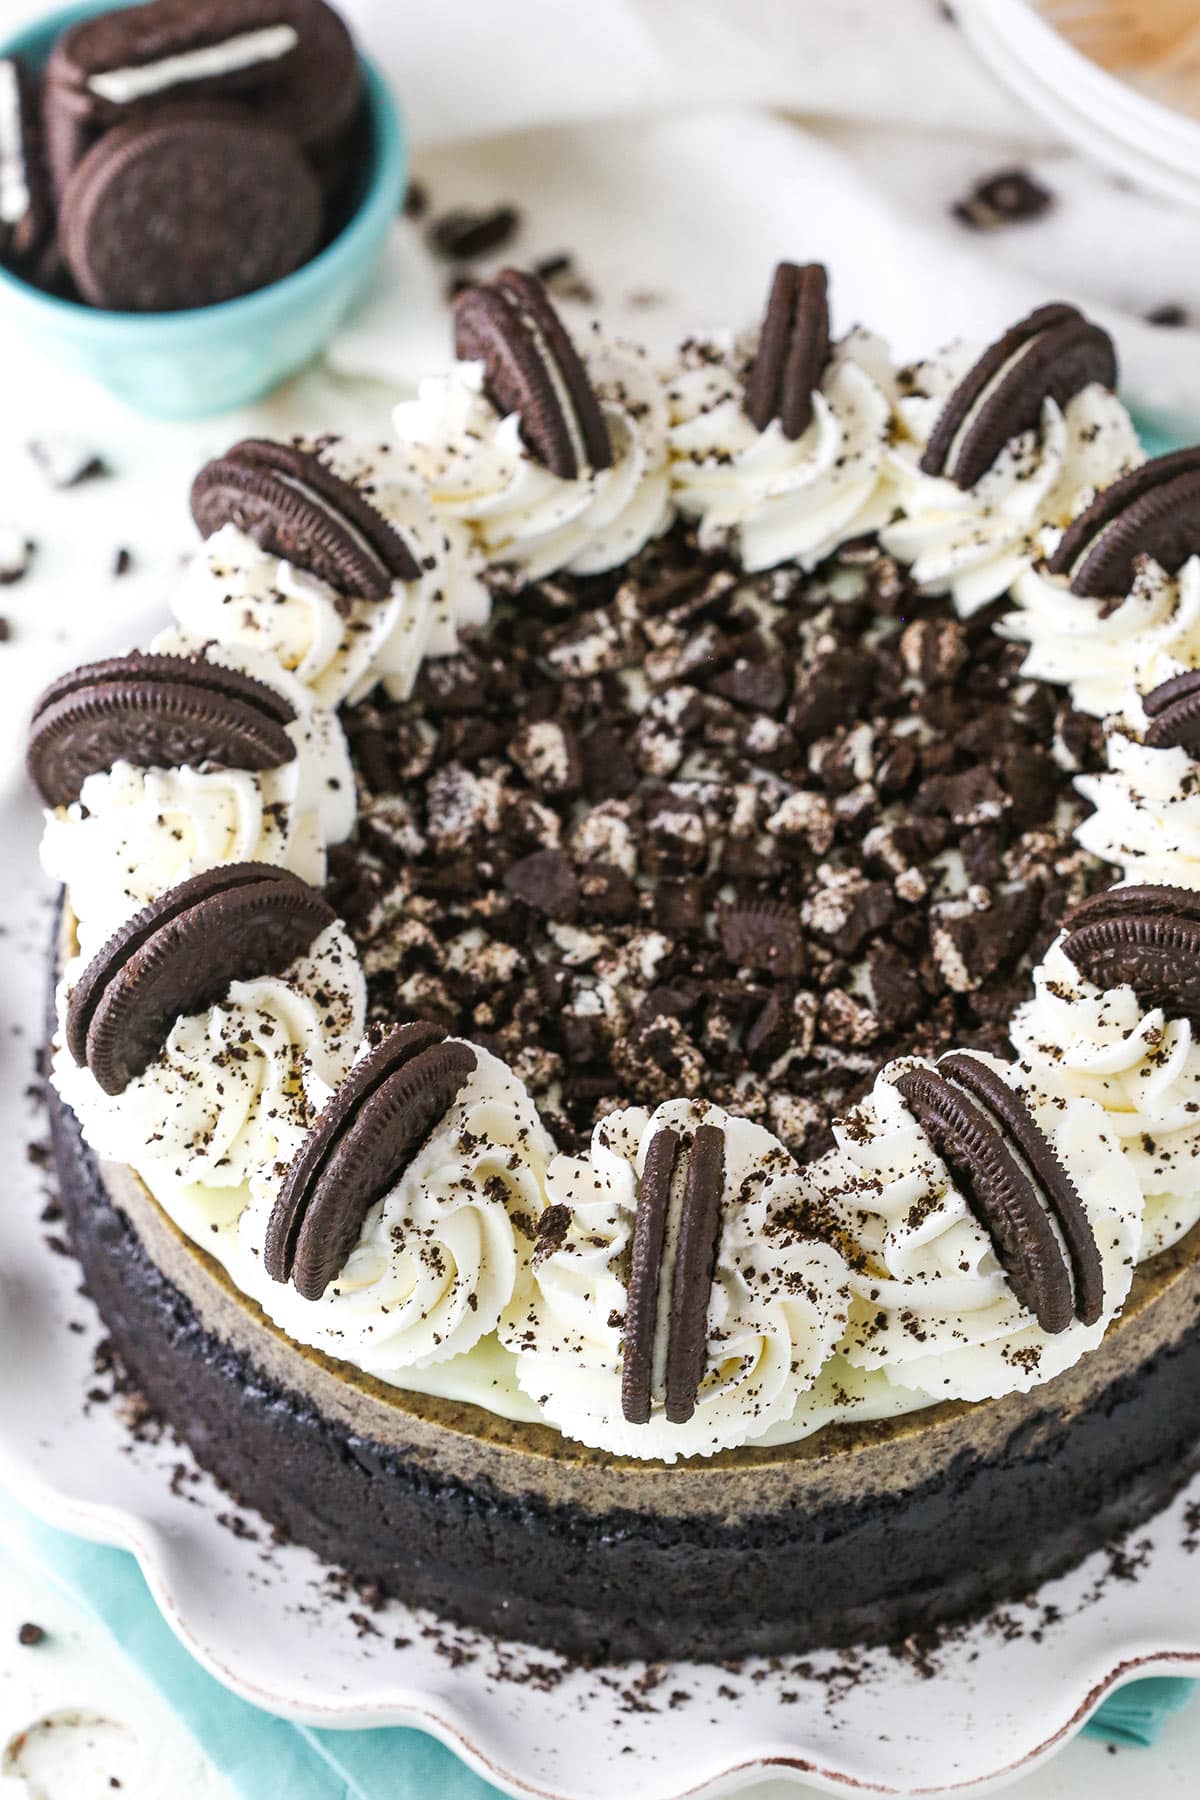 Overehead of the Best Oreo cheesecake on a cake platter.